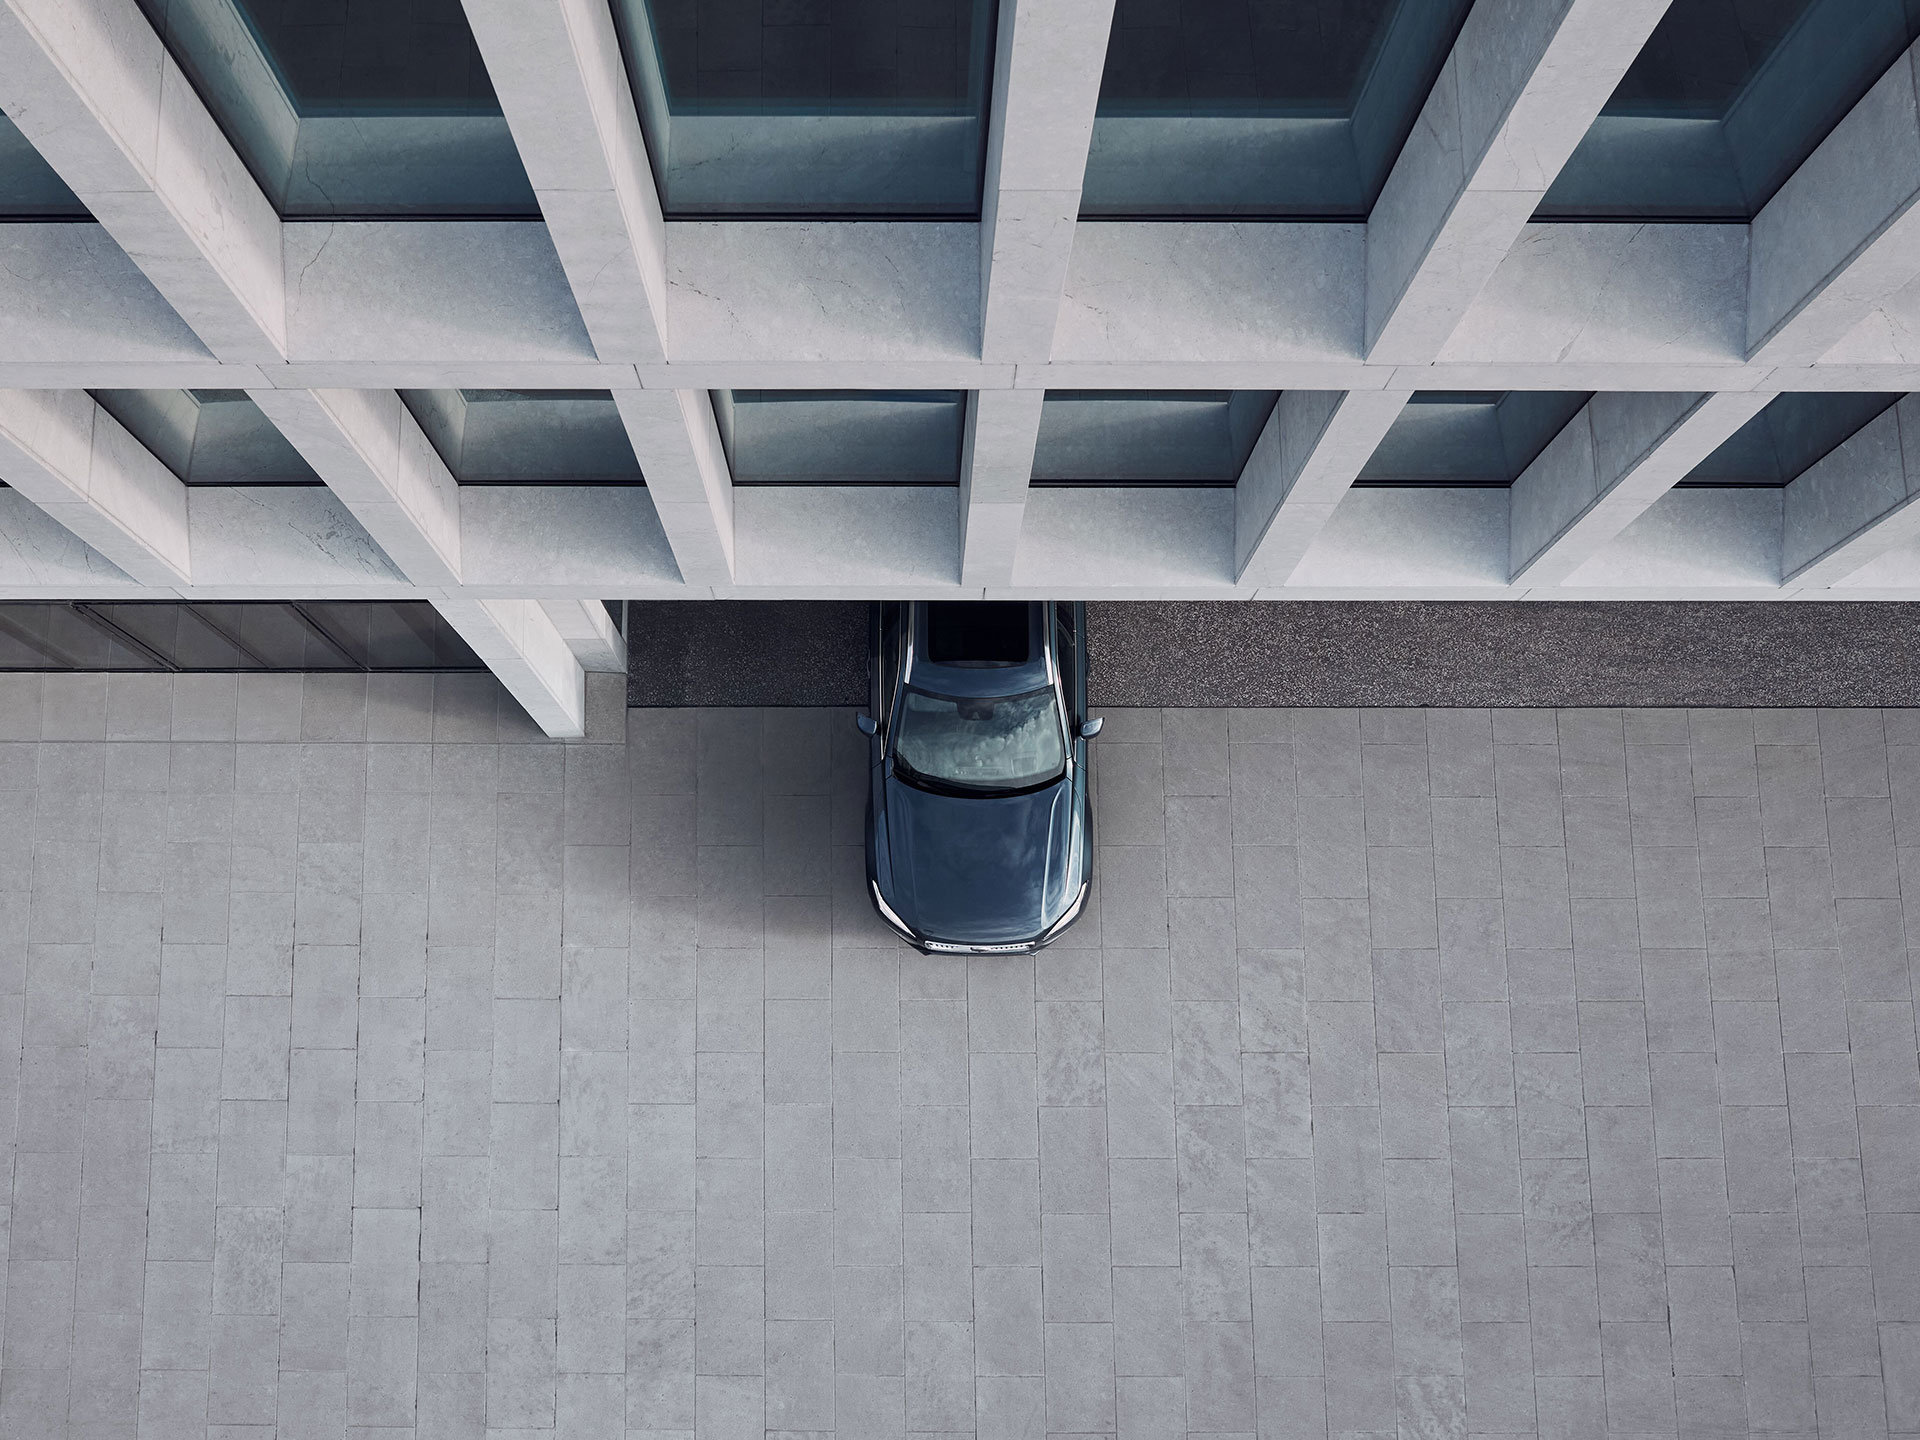 A bird’s-eye view of the front half of a Volvo car exiting from an urban building.